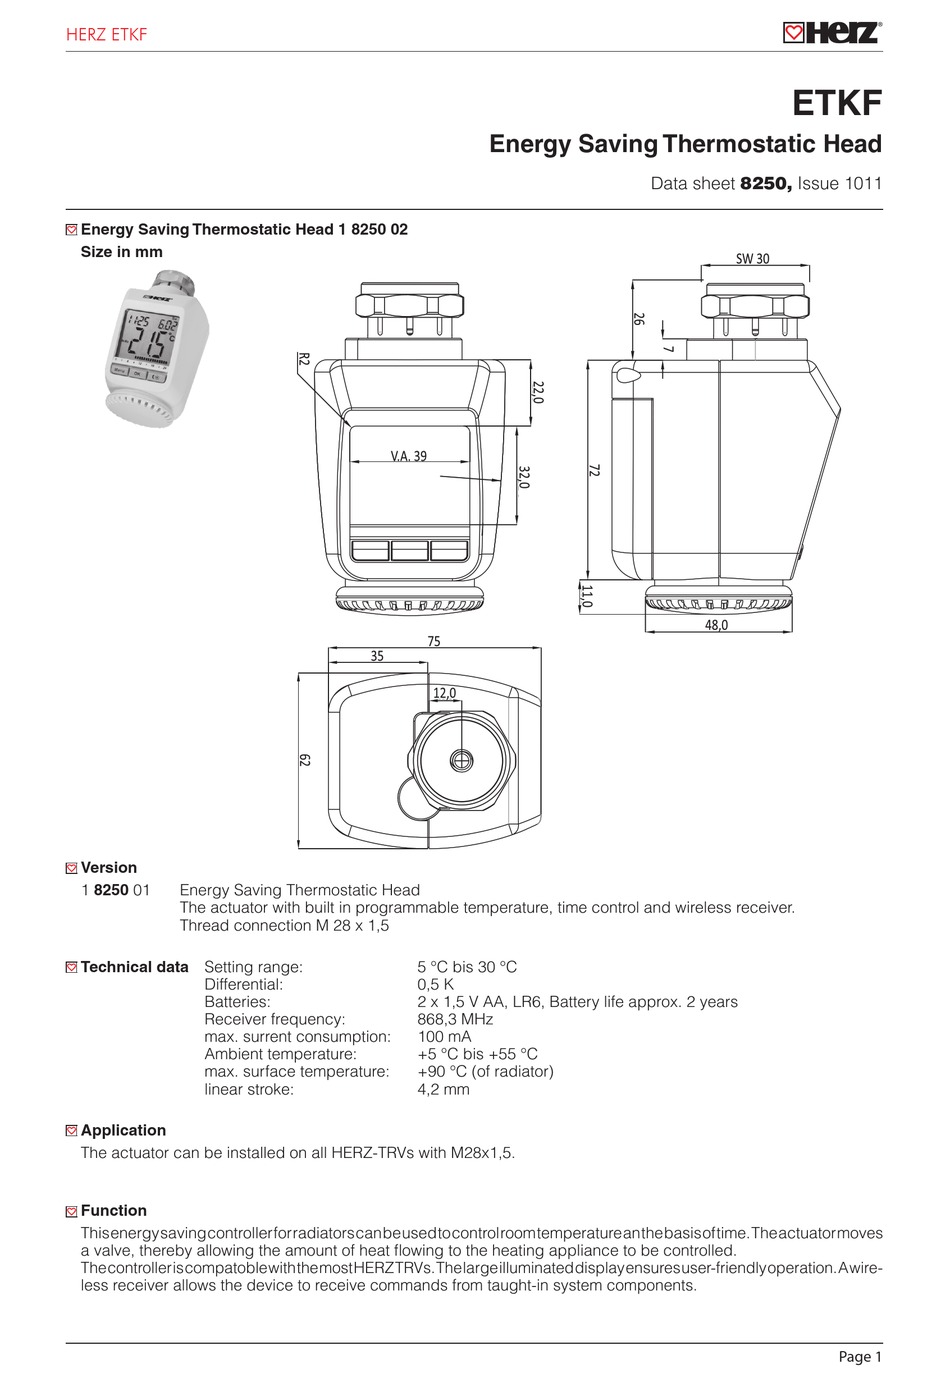 HERZ H7711 Digital Thermostat PRODUCT SPECIFICATION SHEET 